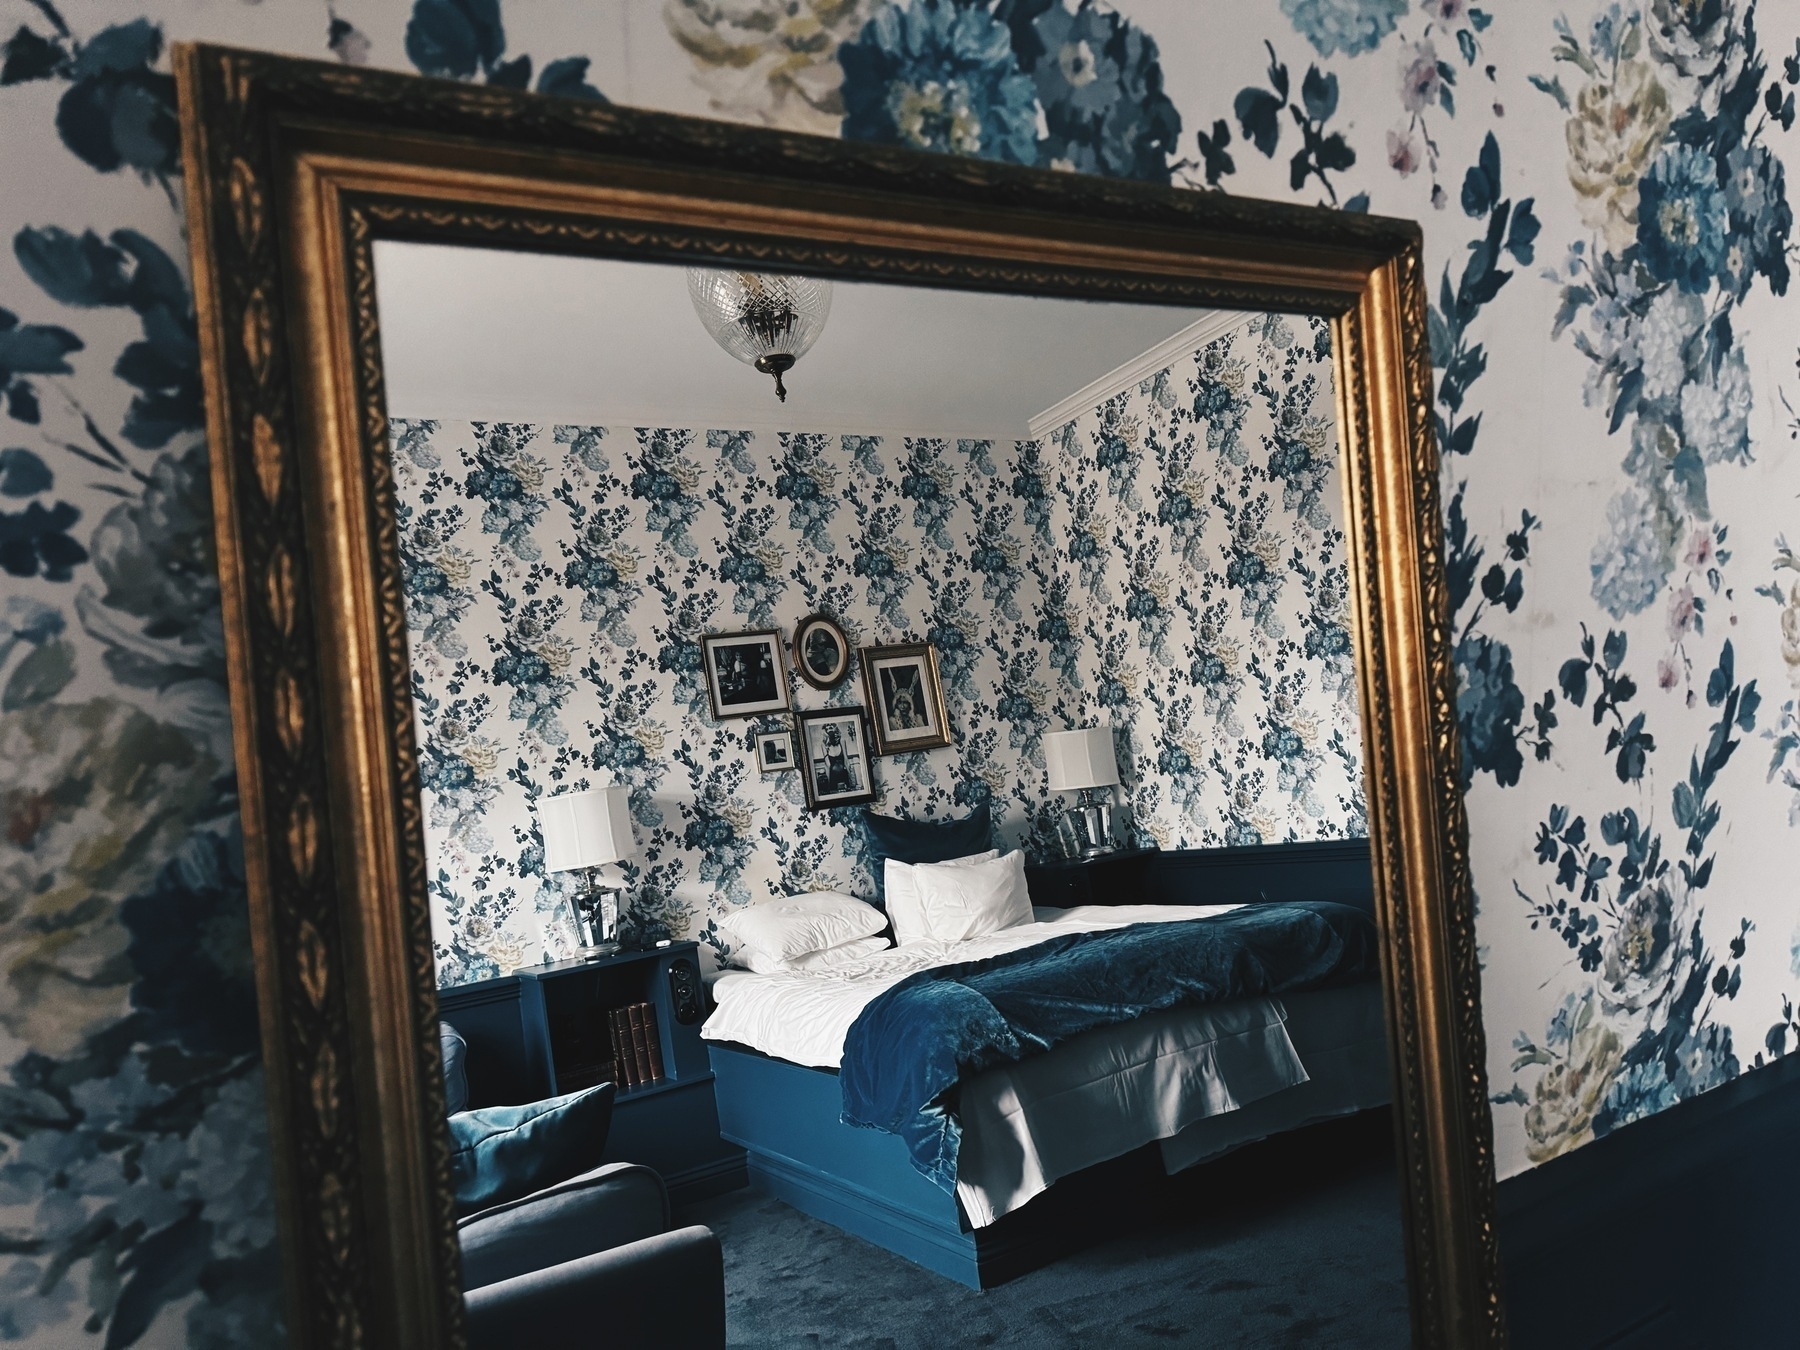 A golden mirror against a wall with a flower pattern. The mirror shows a cozy hotel bed.